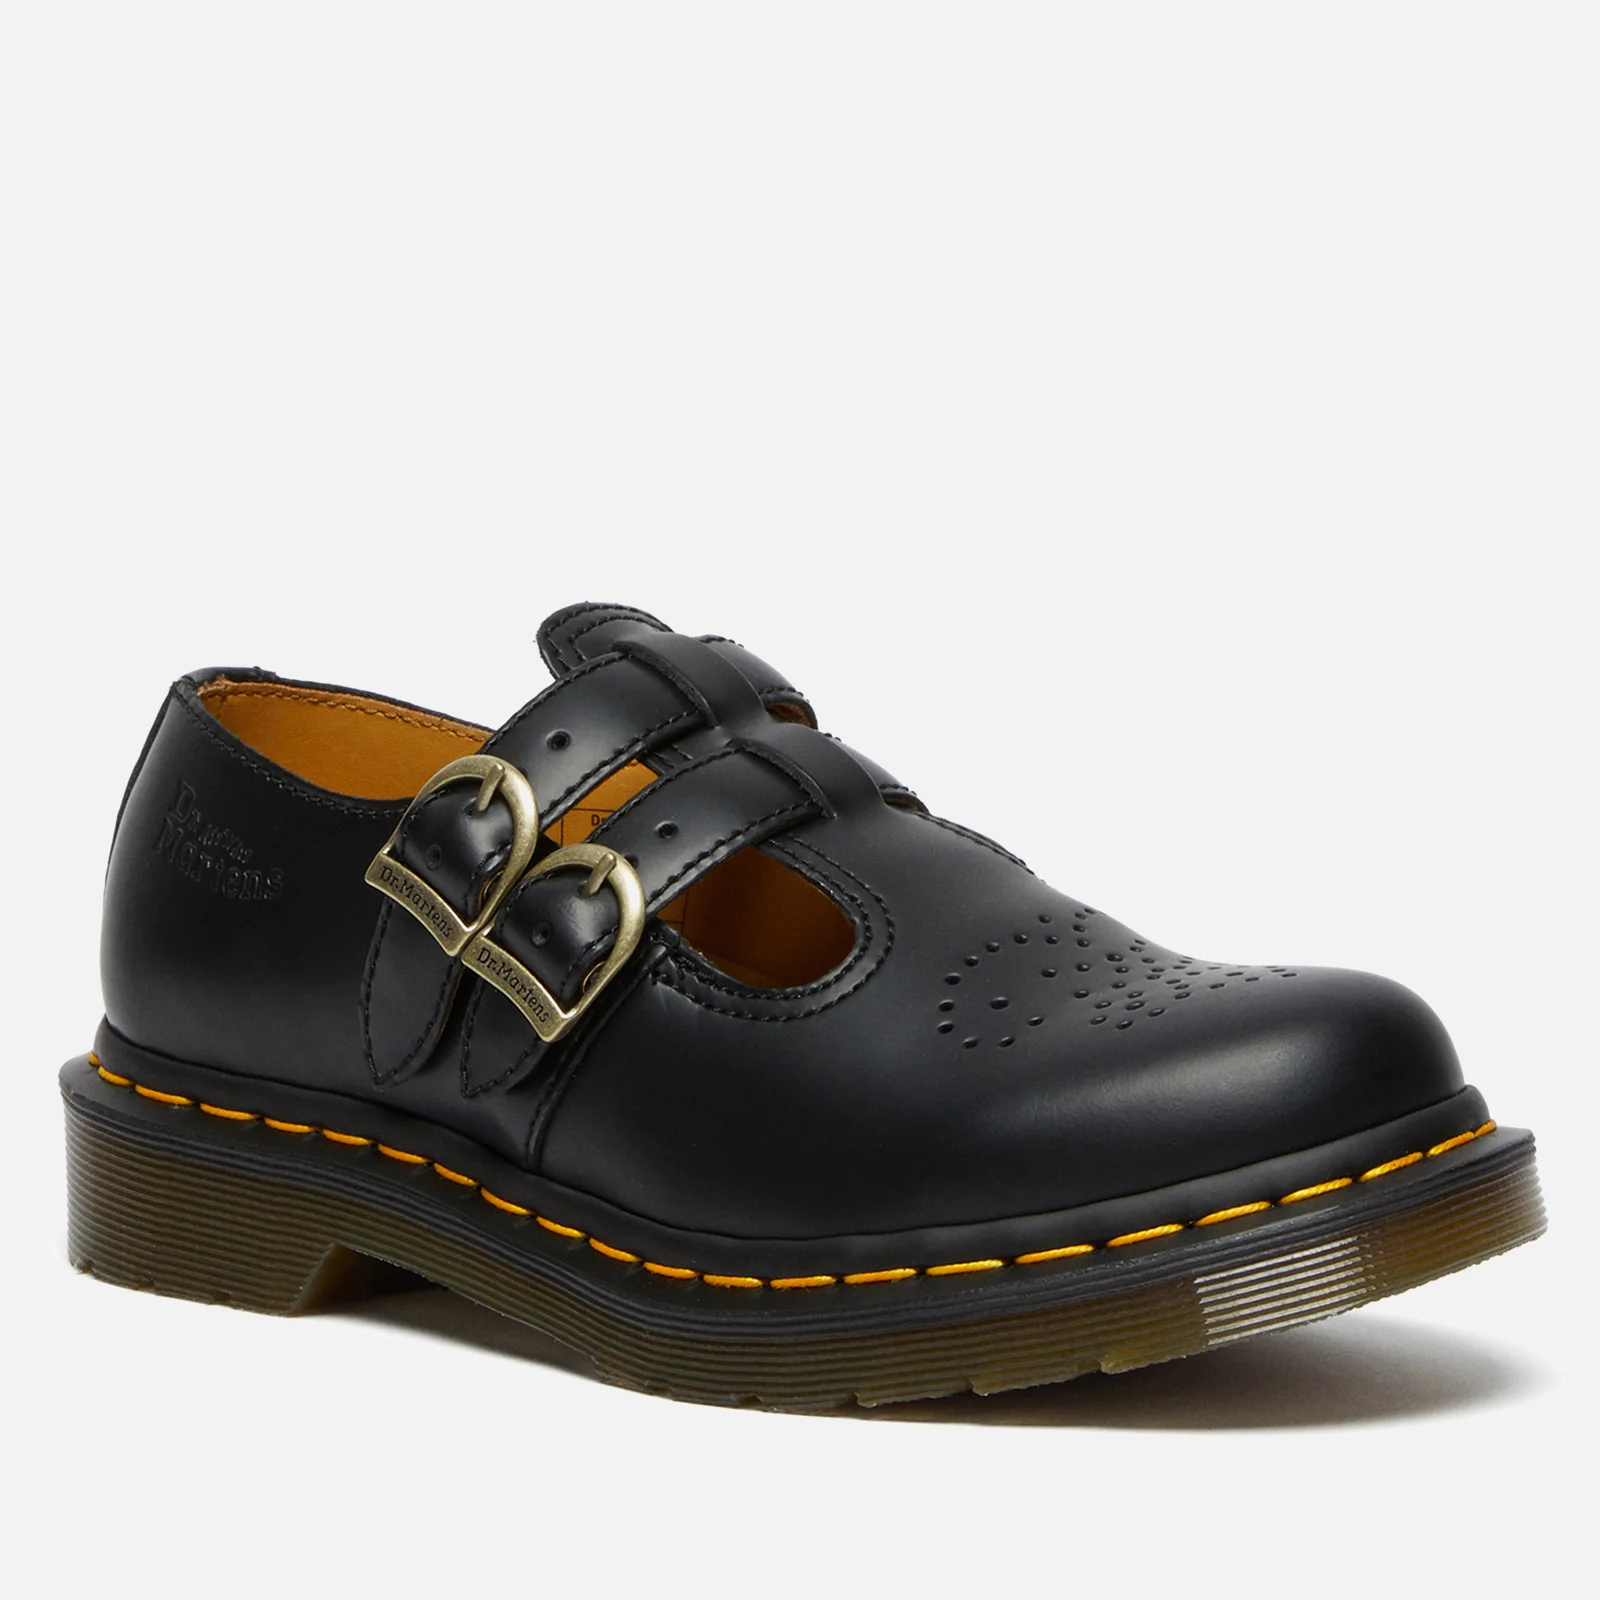 Dr. Martens Women's 8065 Leather Mary-Jane Shoes | Allsole